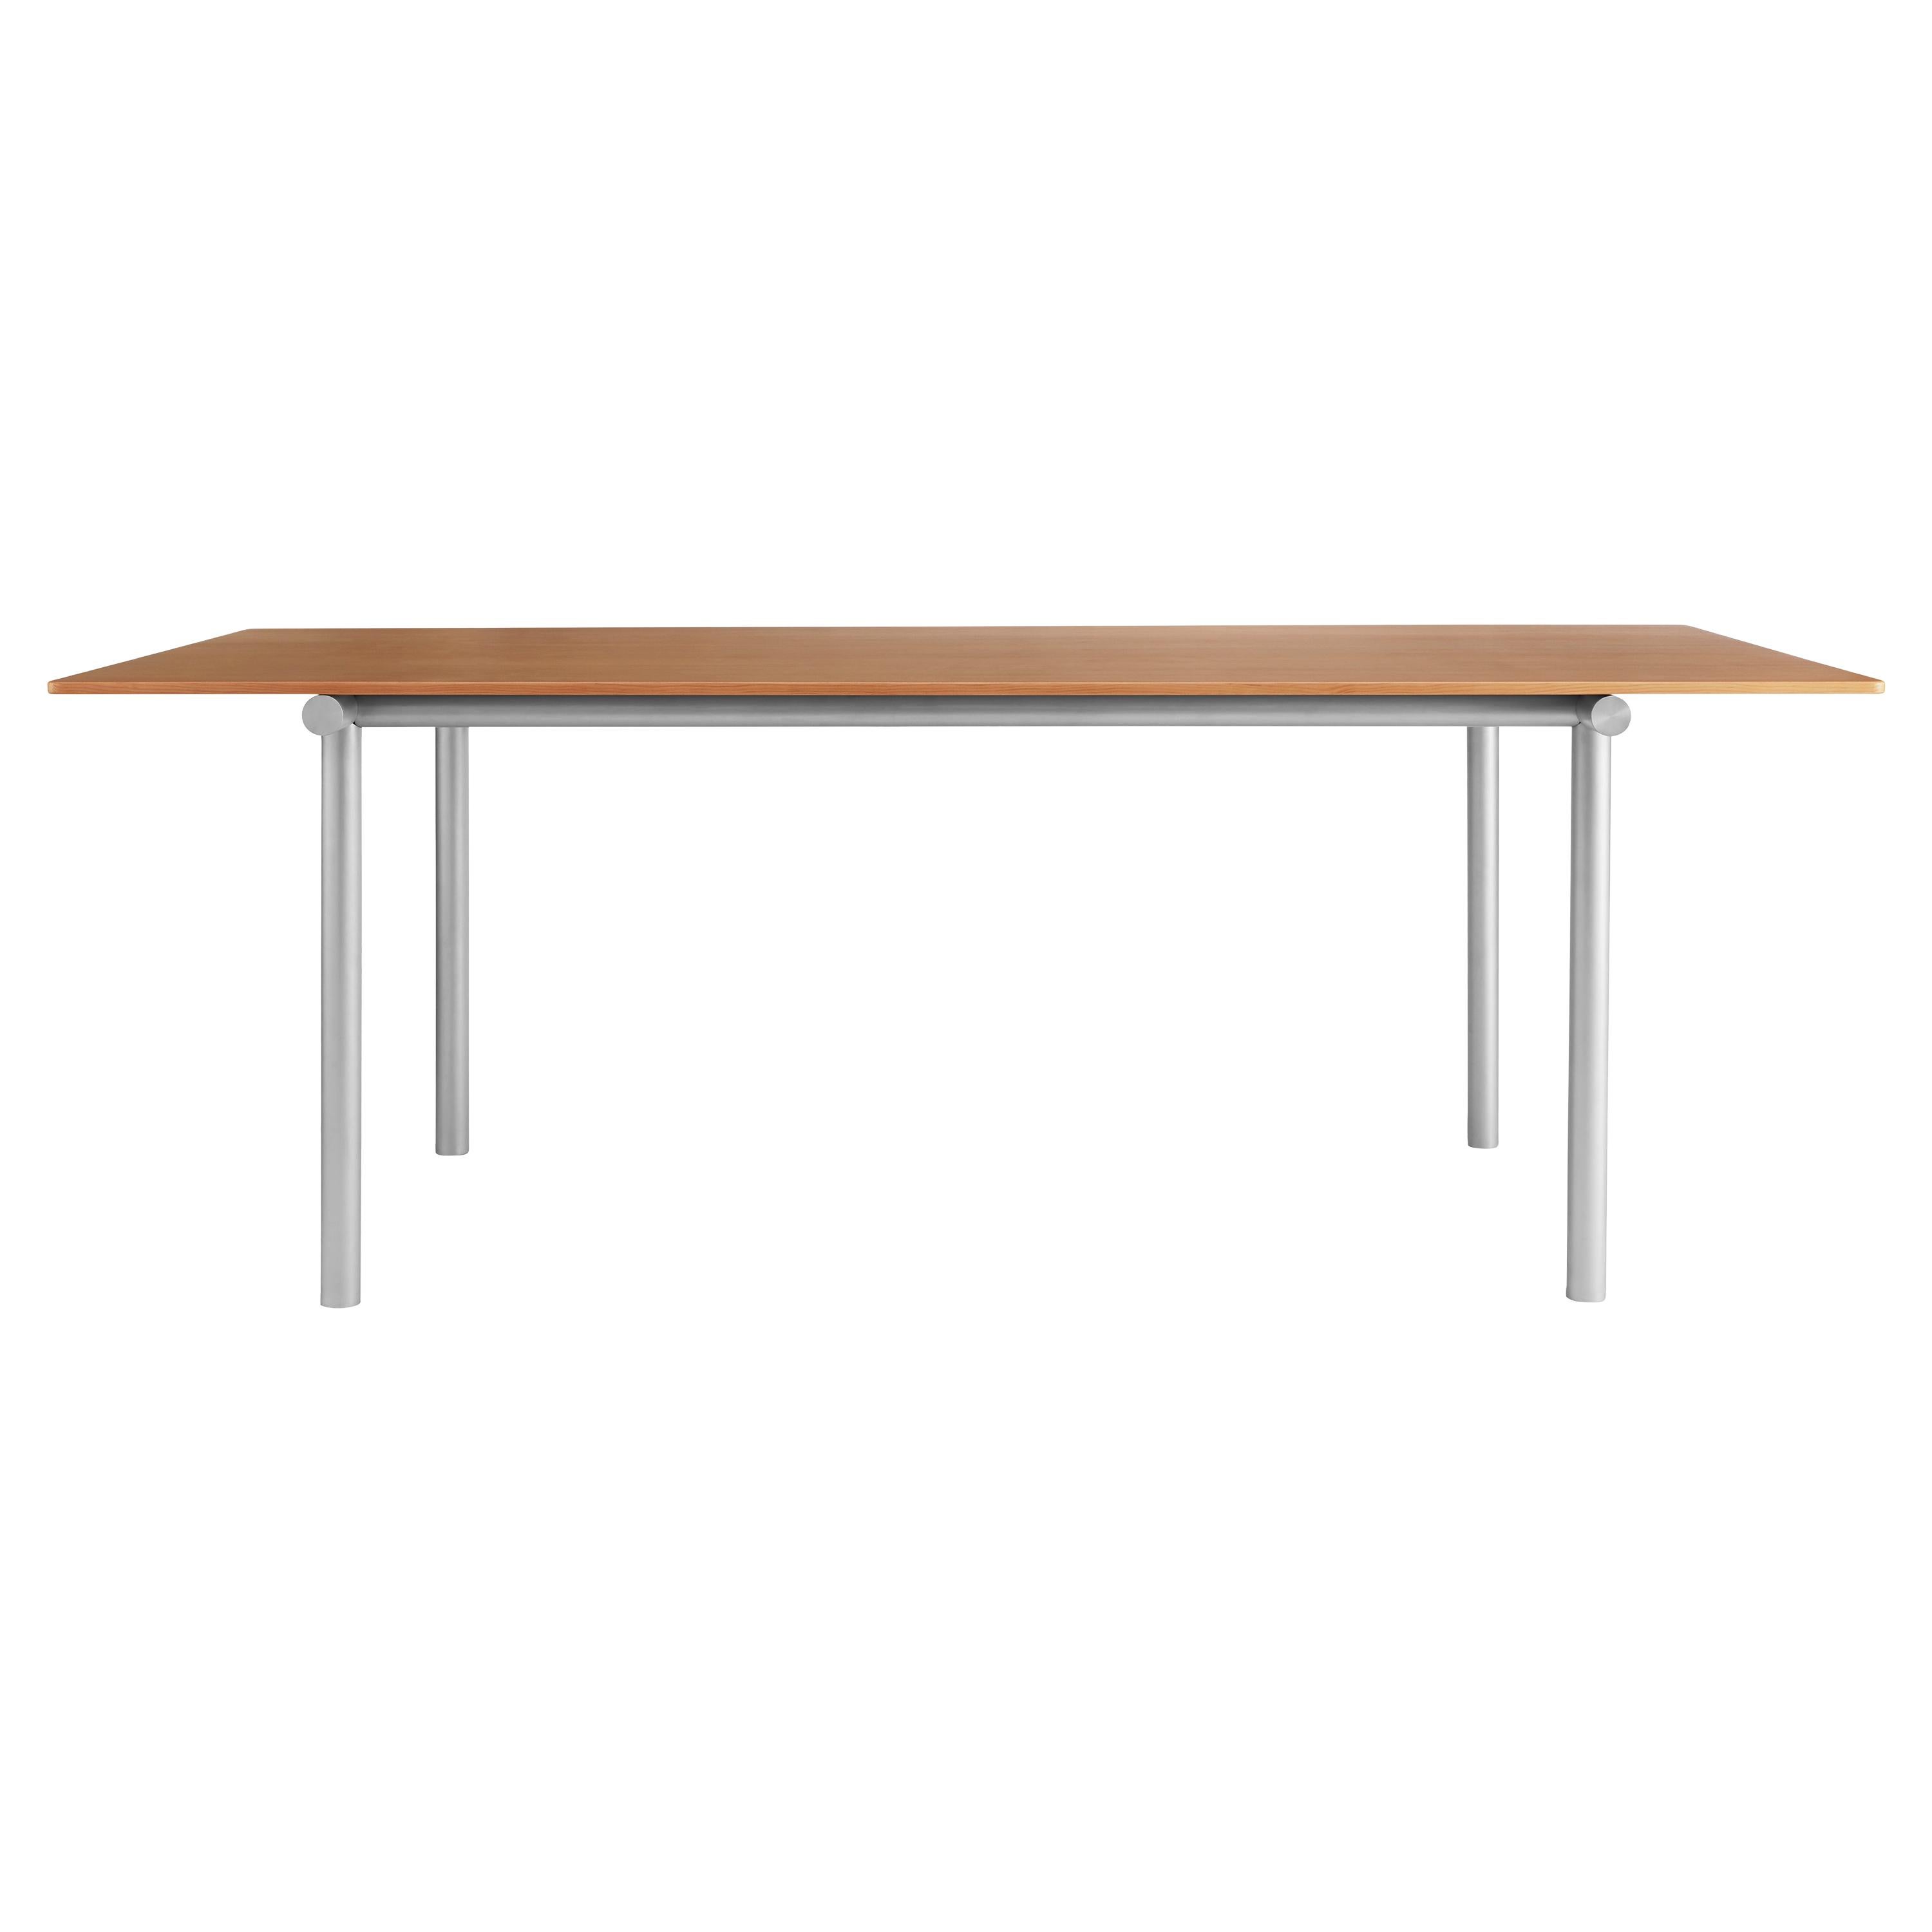 For Sale: Brown (Oregon Pine) Tubby Tube Conference Table with Aluminum Frame by Faye Toogood